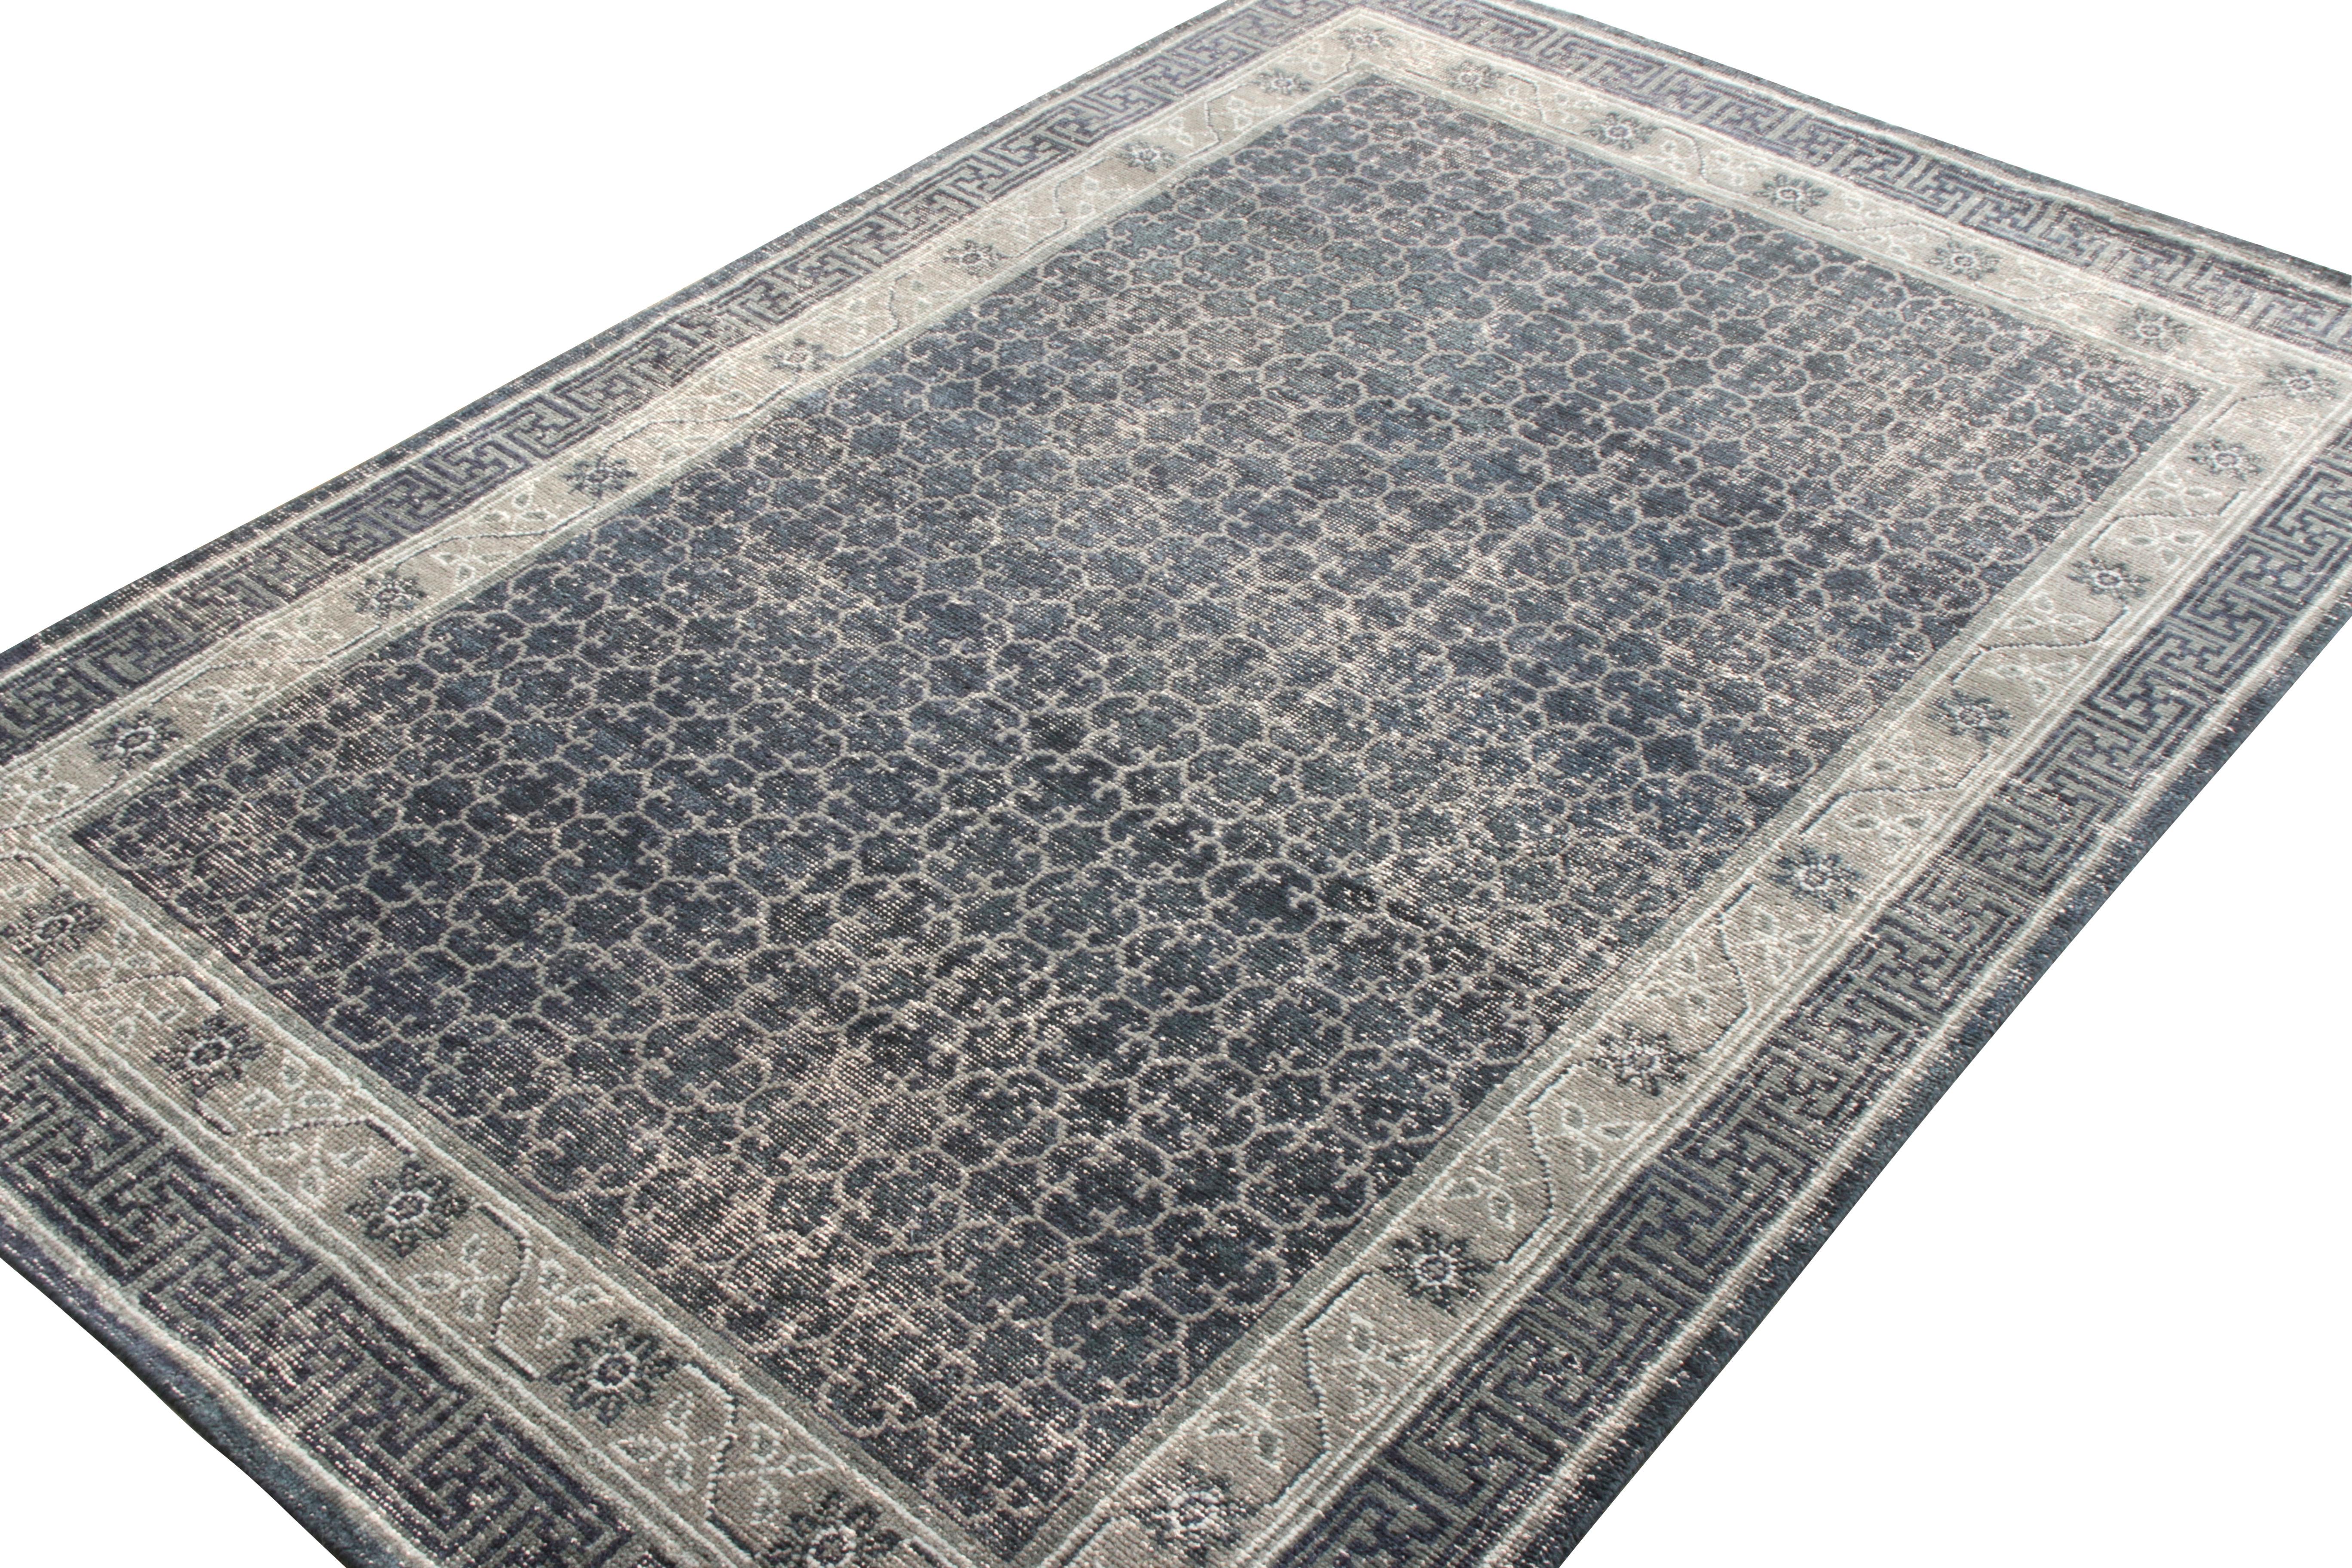 Indian Rug & Kilim’s Distressed Khotan Style Rug in Blue, Gray Geometric Pattern For Sale